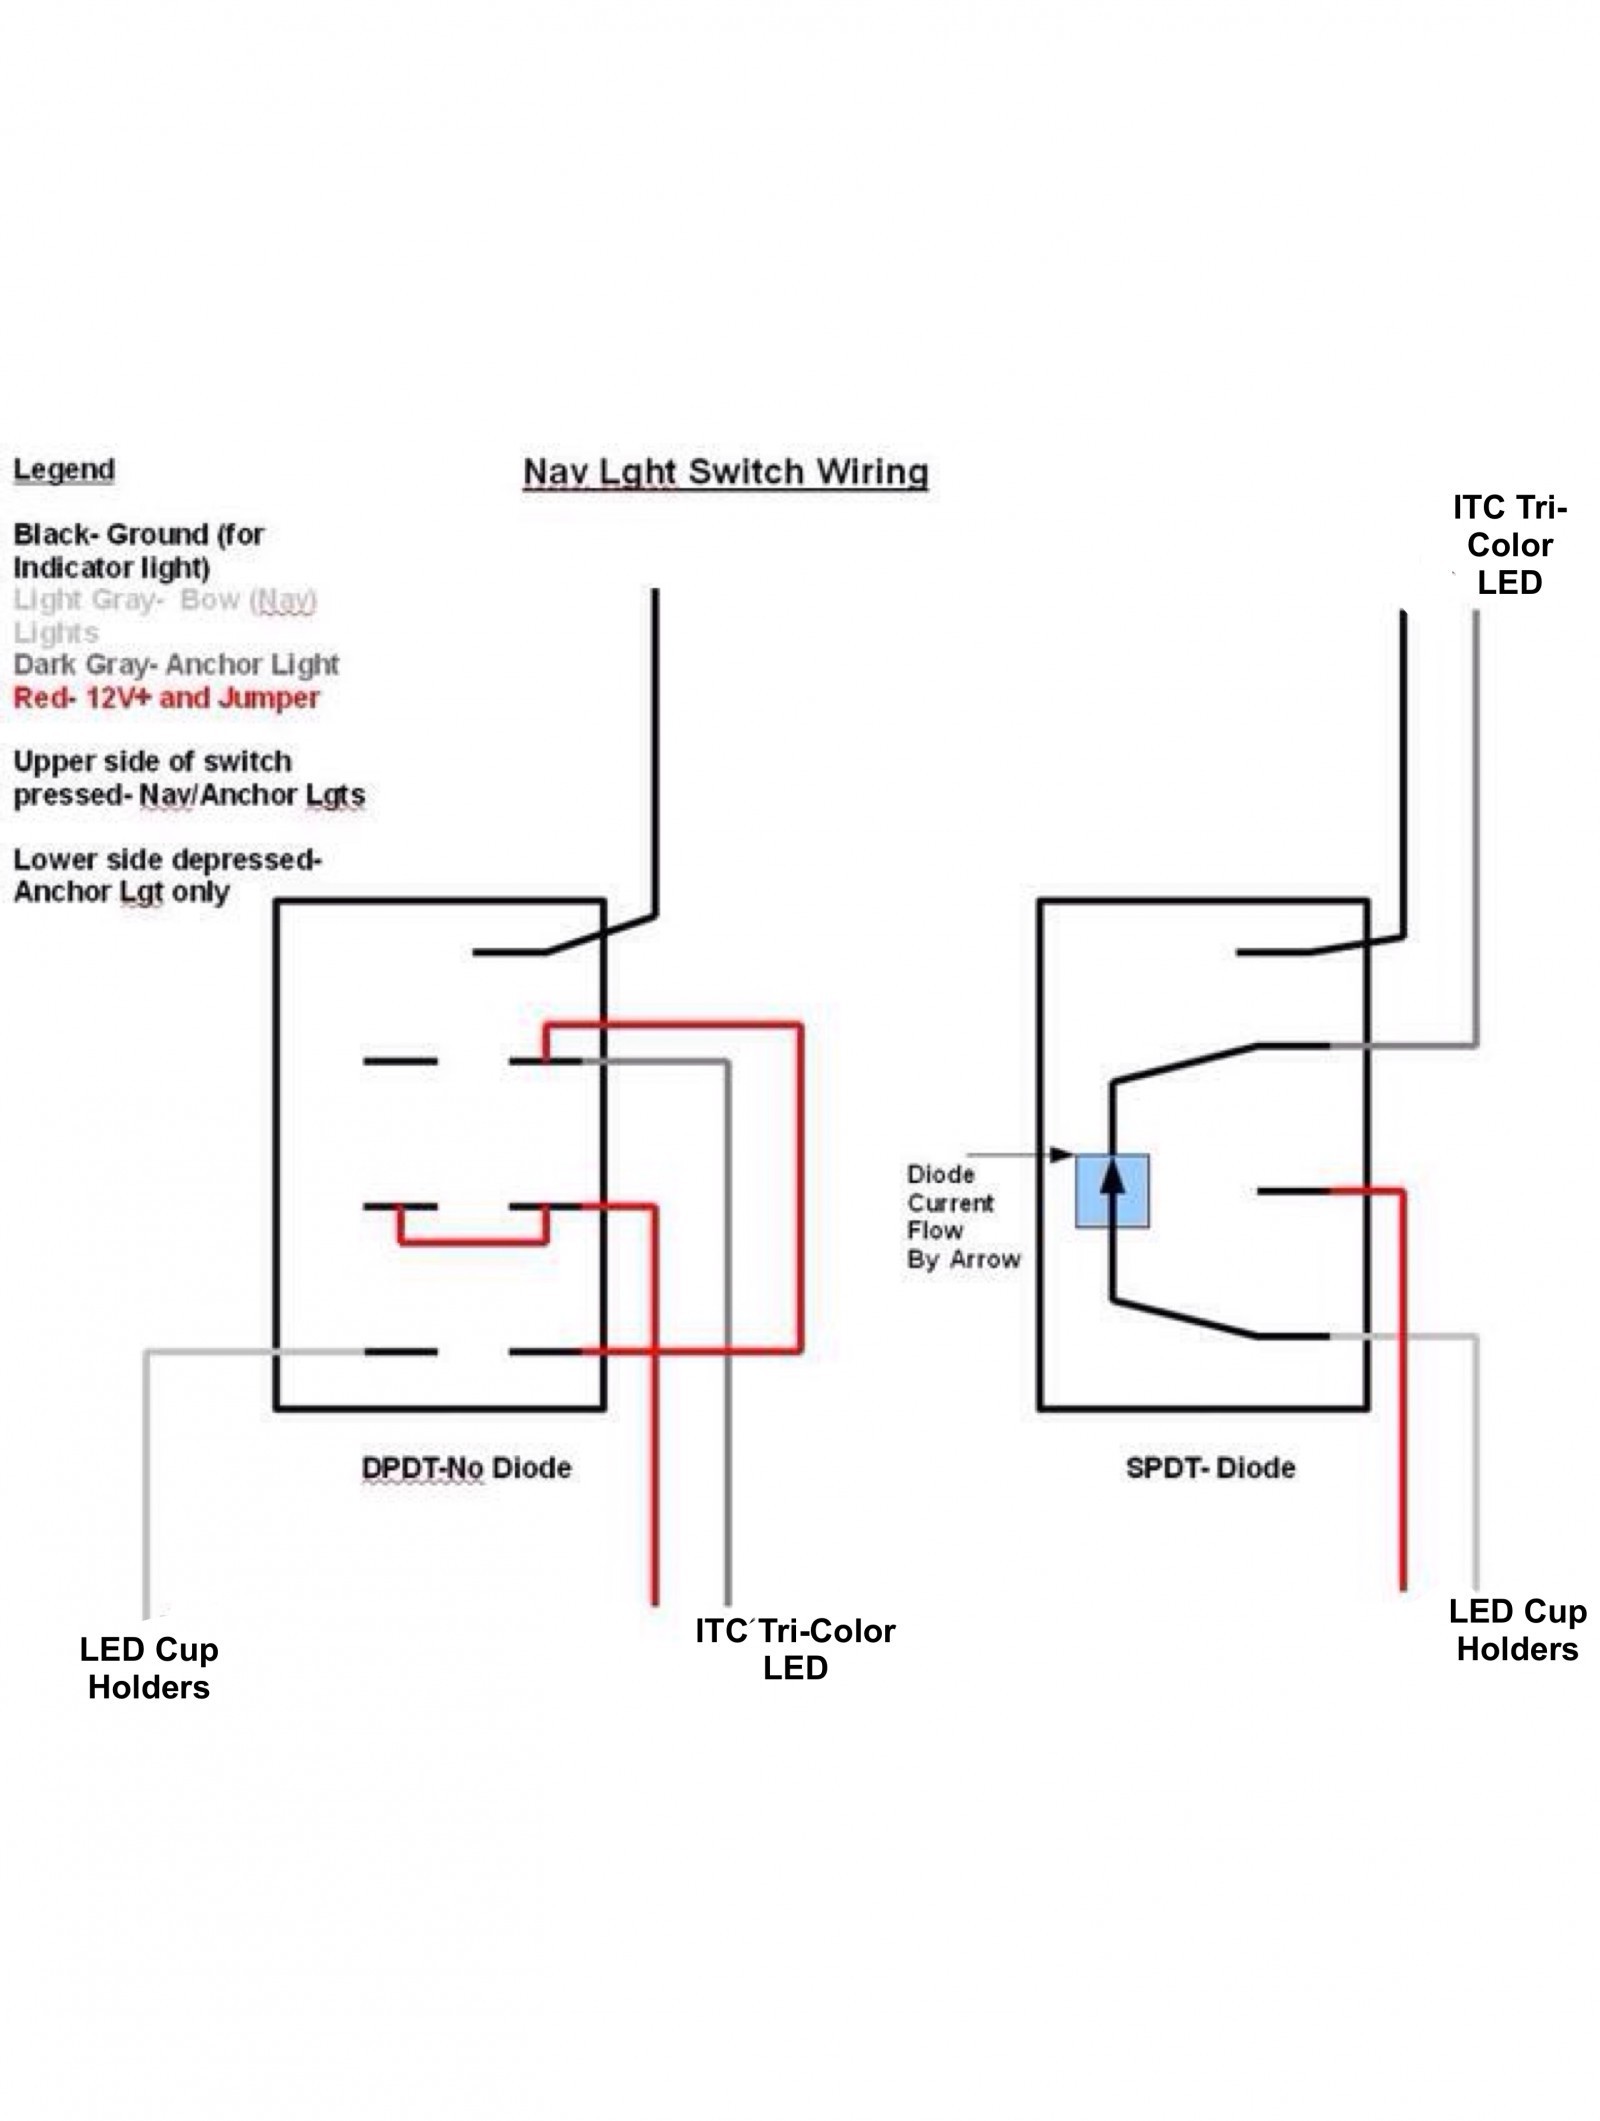 Single Switch Light Wiring Diagram New Wiring A Bathroom Fan And Standard Wiring A Light Bathroom Single Light Wiring Diagram